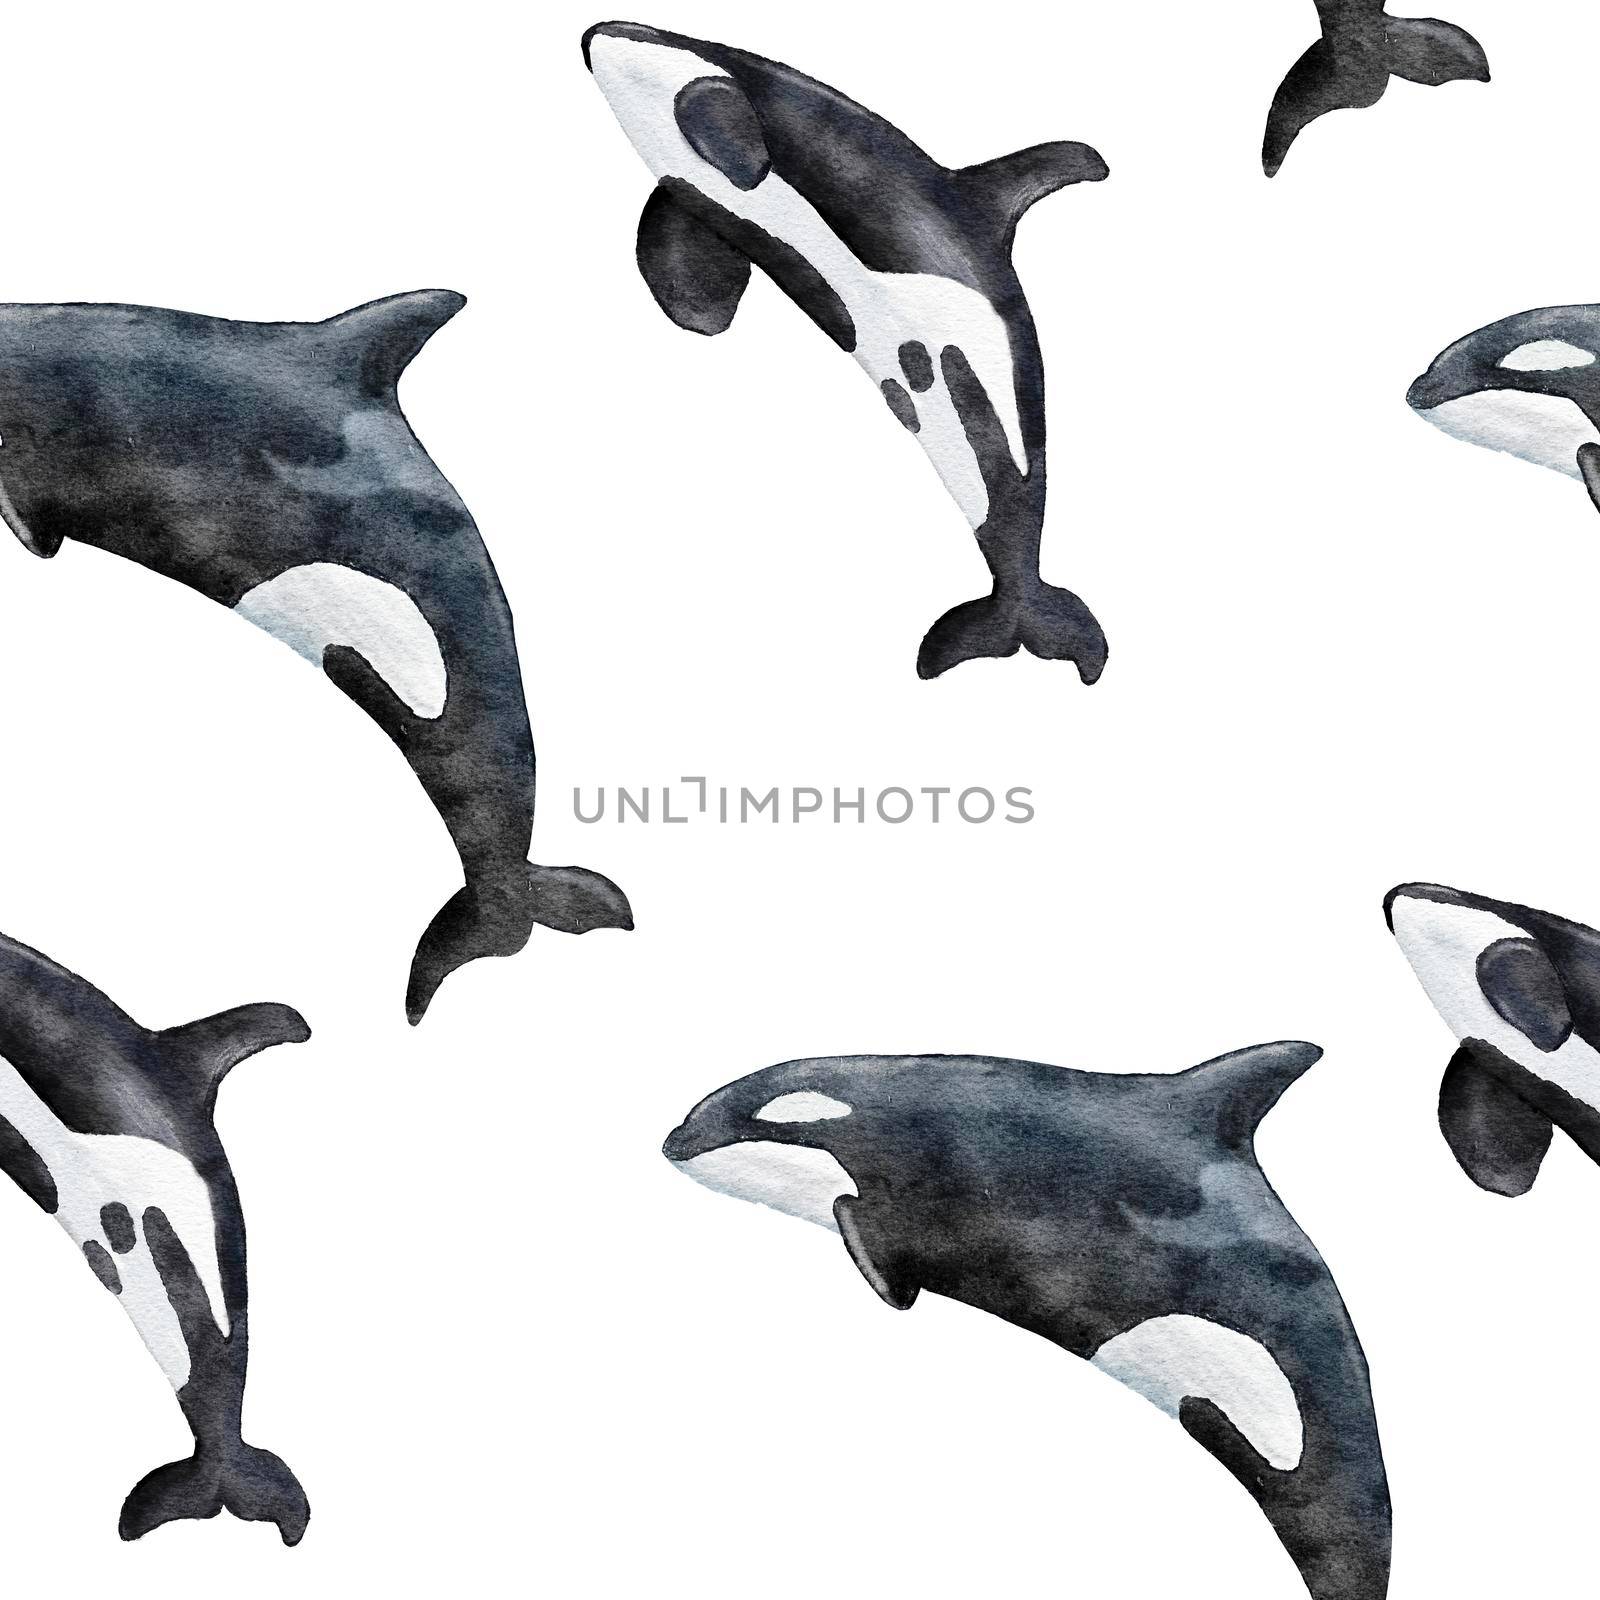 Hand drawn watercolor seamless pattern with orca killer whale. Sea ocean marine animal, nautical underwater endangered mammal species. Blue gray illustration for fabric nursery decor, under the sea prints